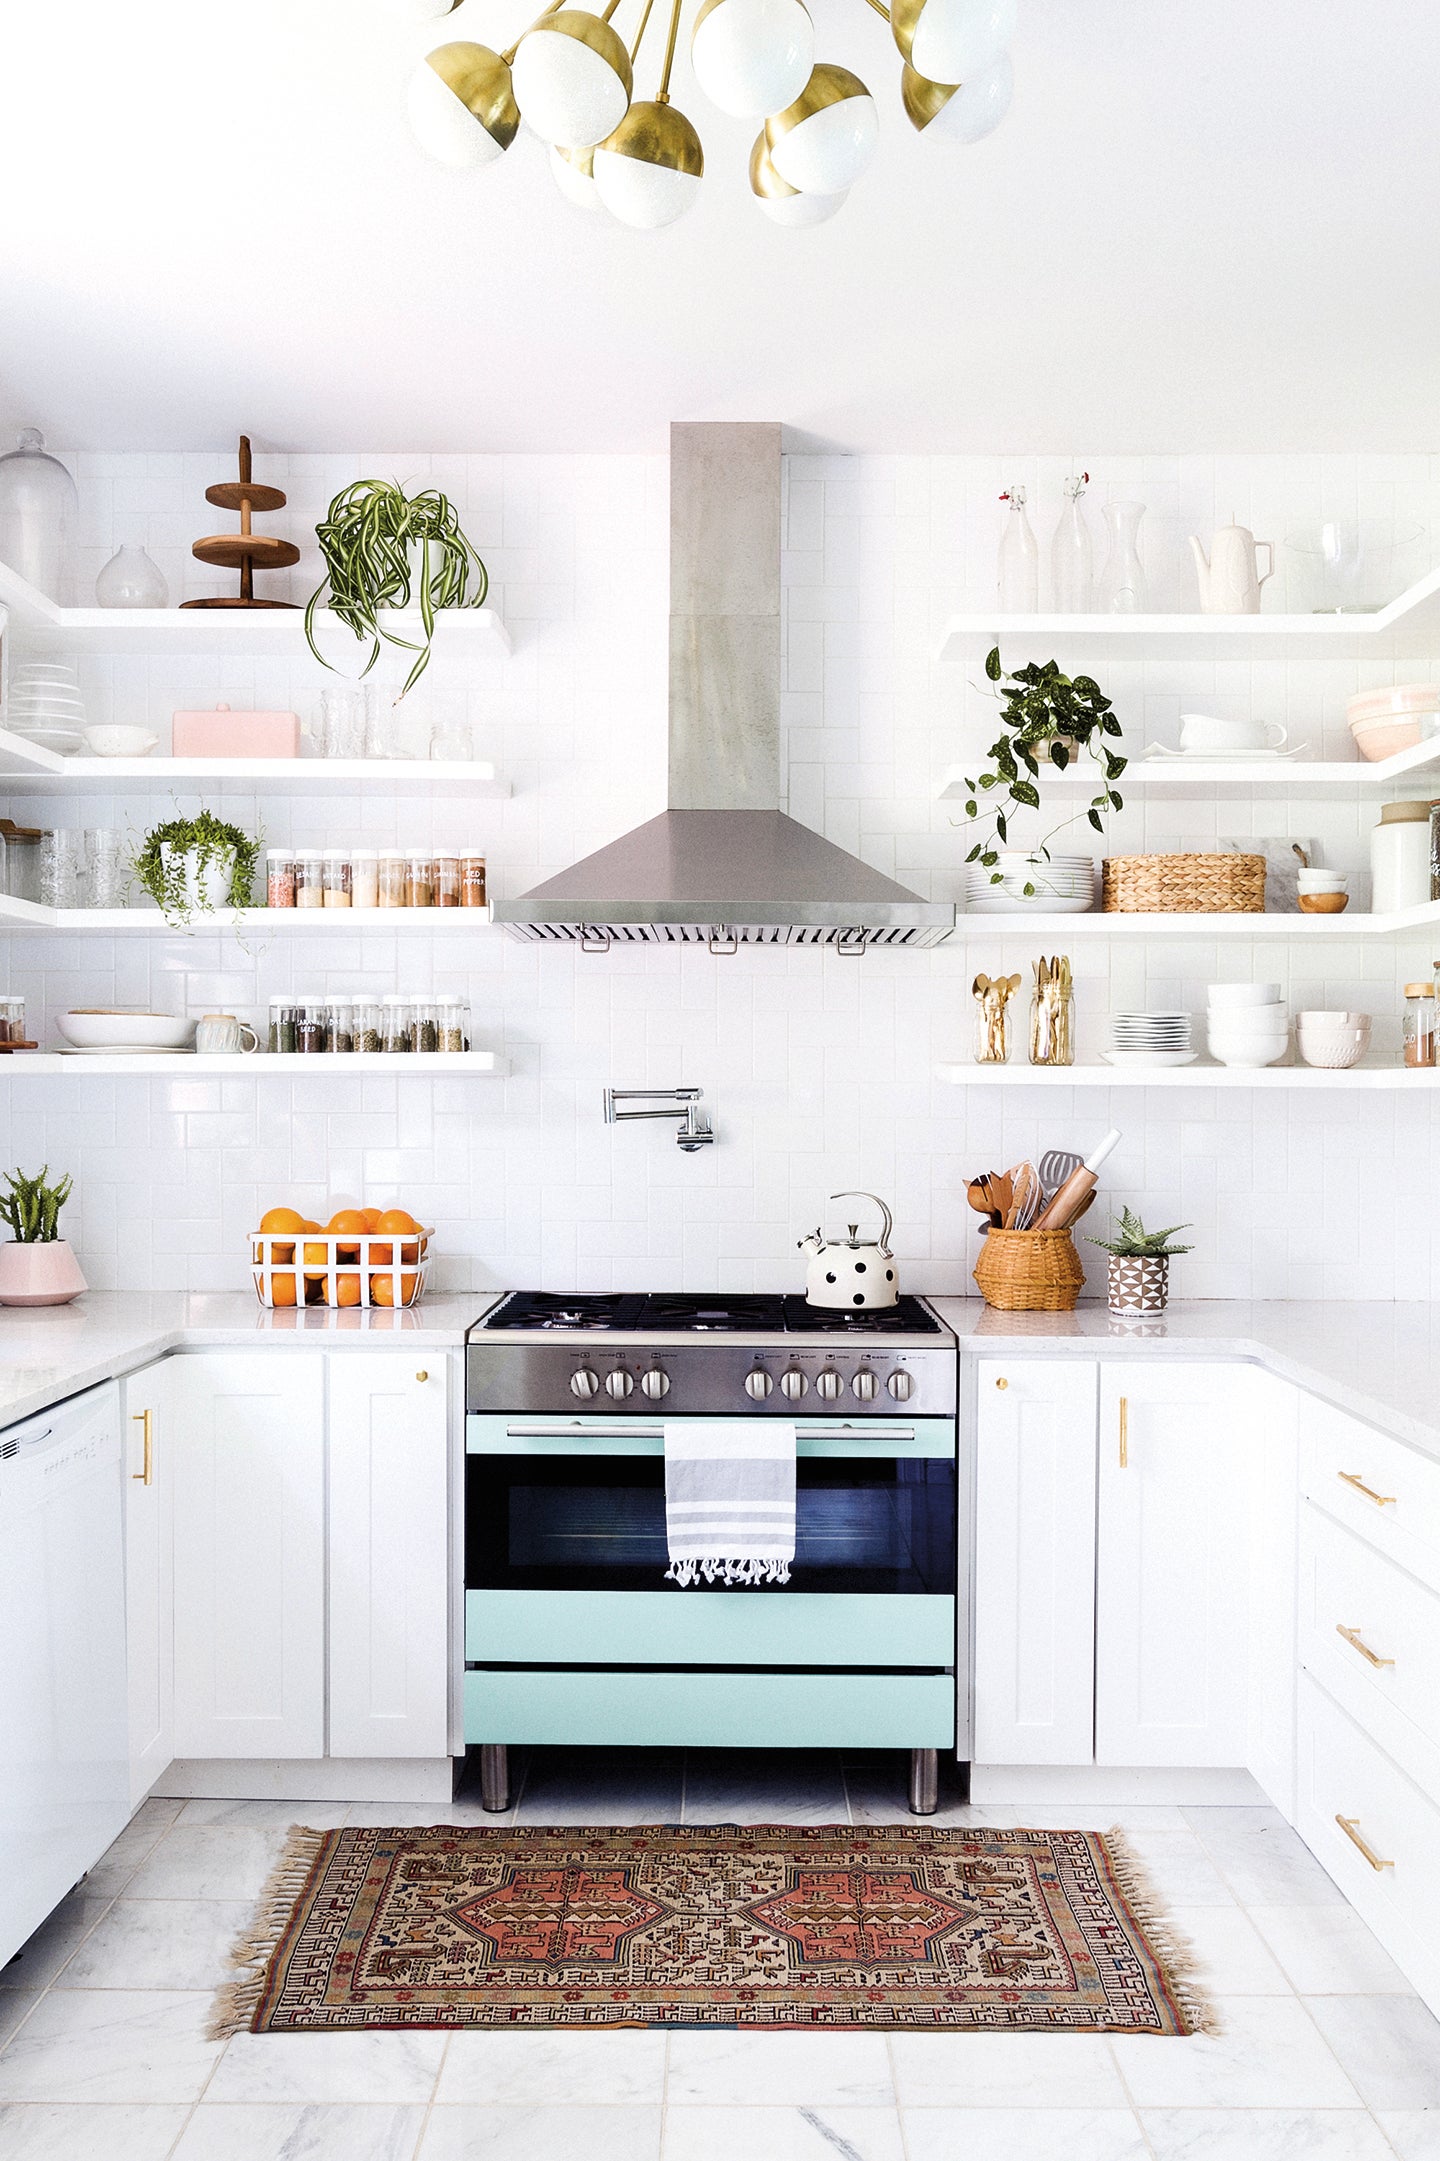 White kitchen with blue oven and open shelving